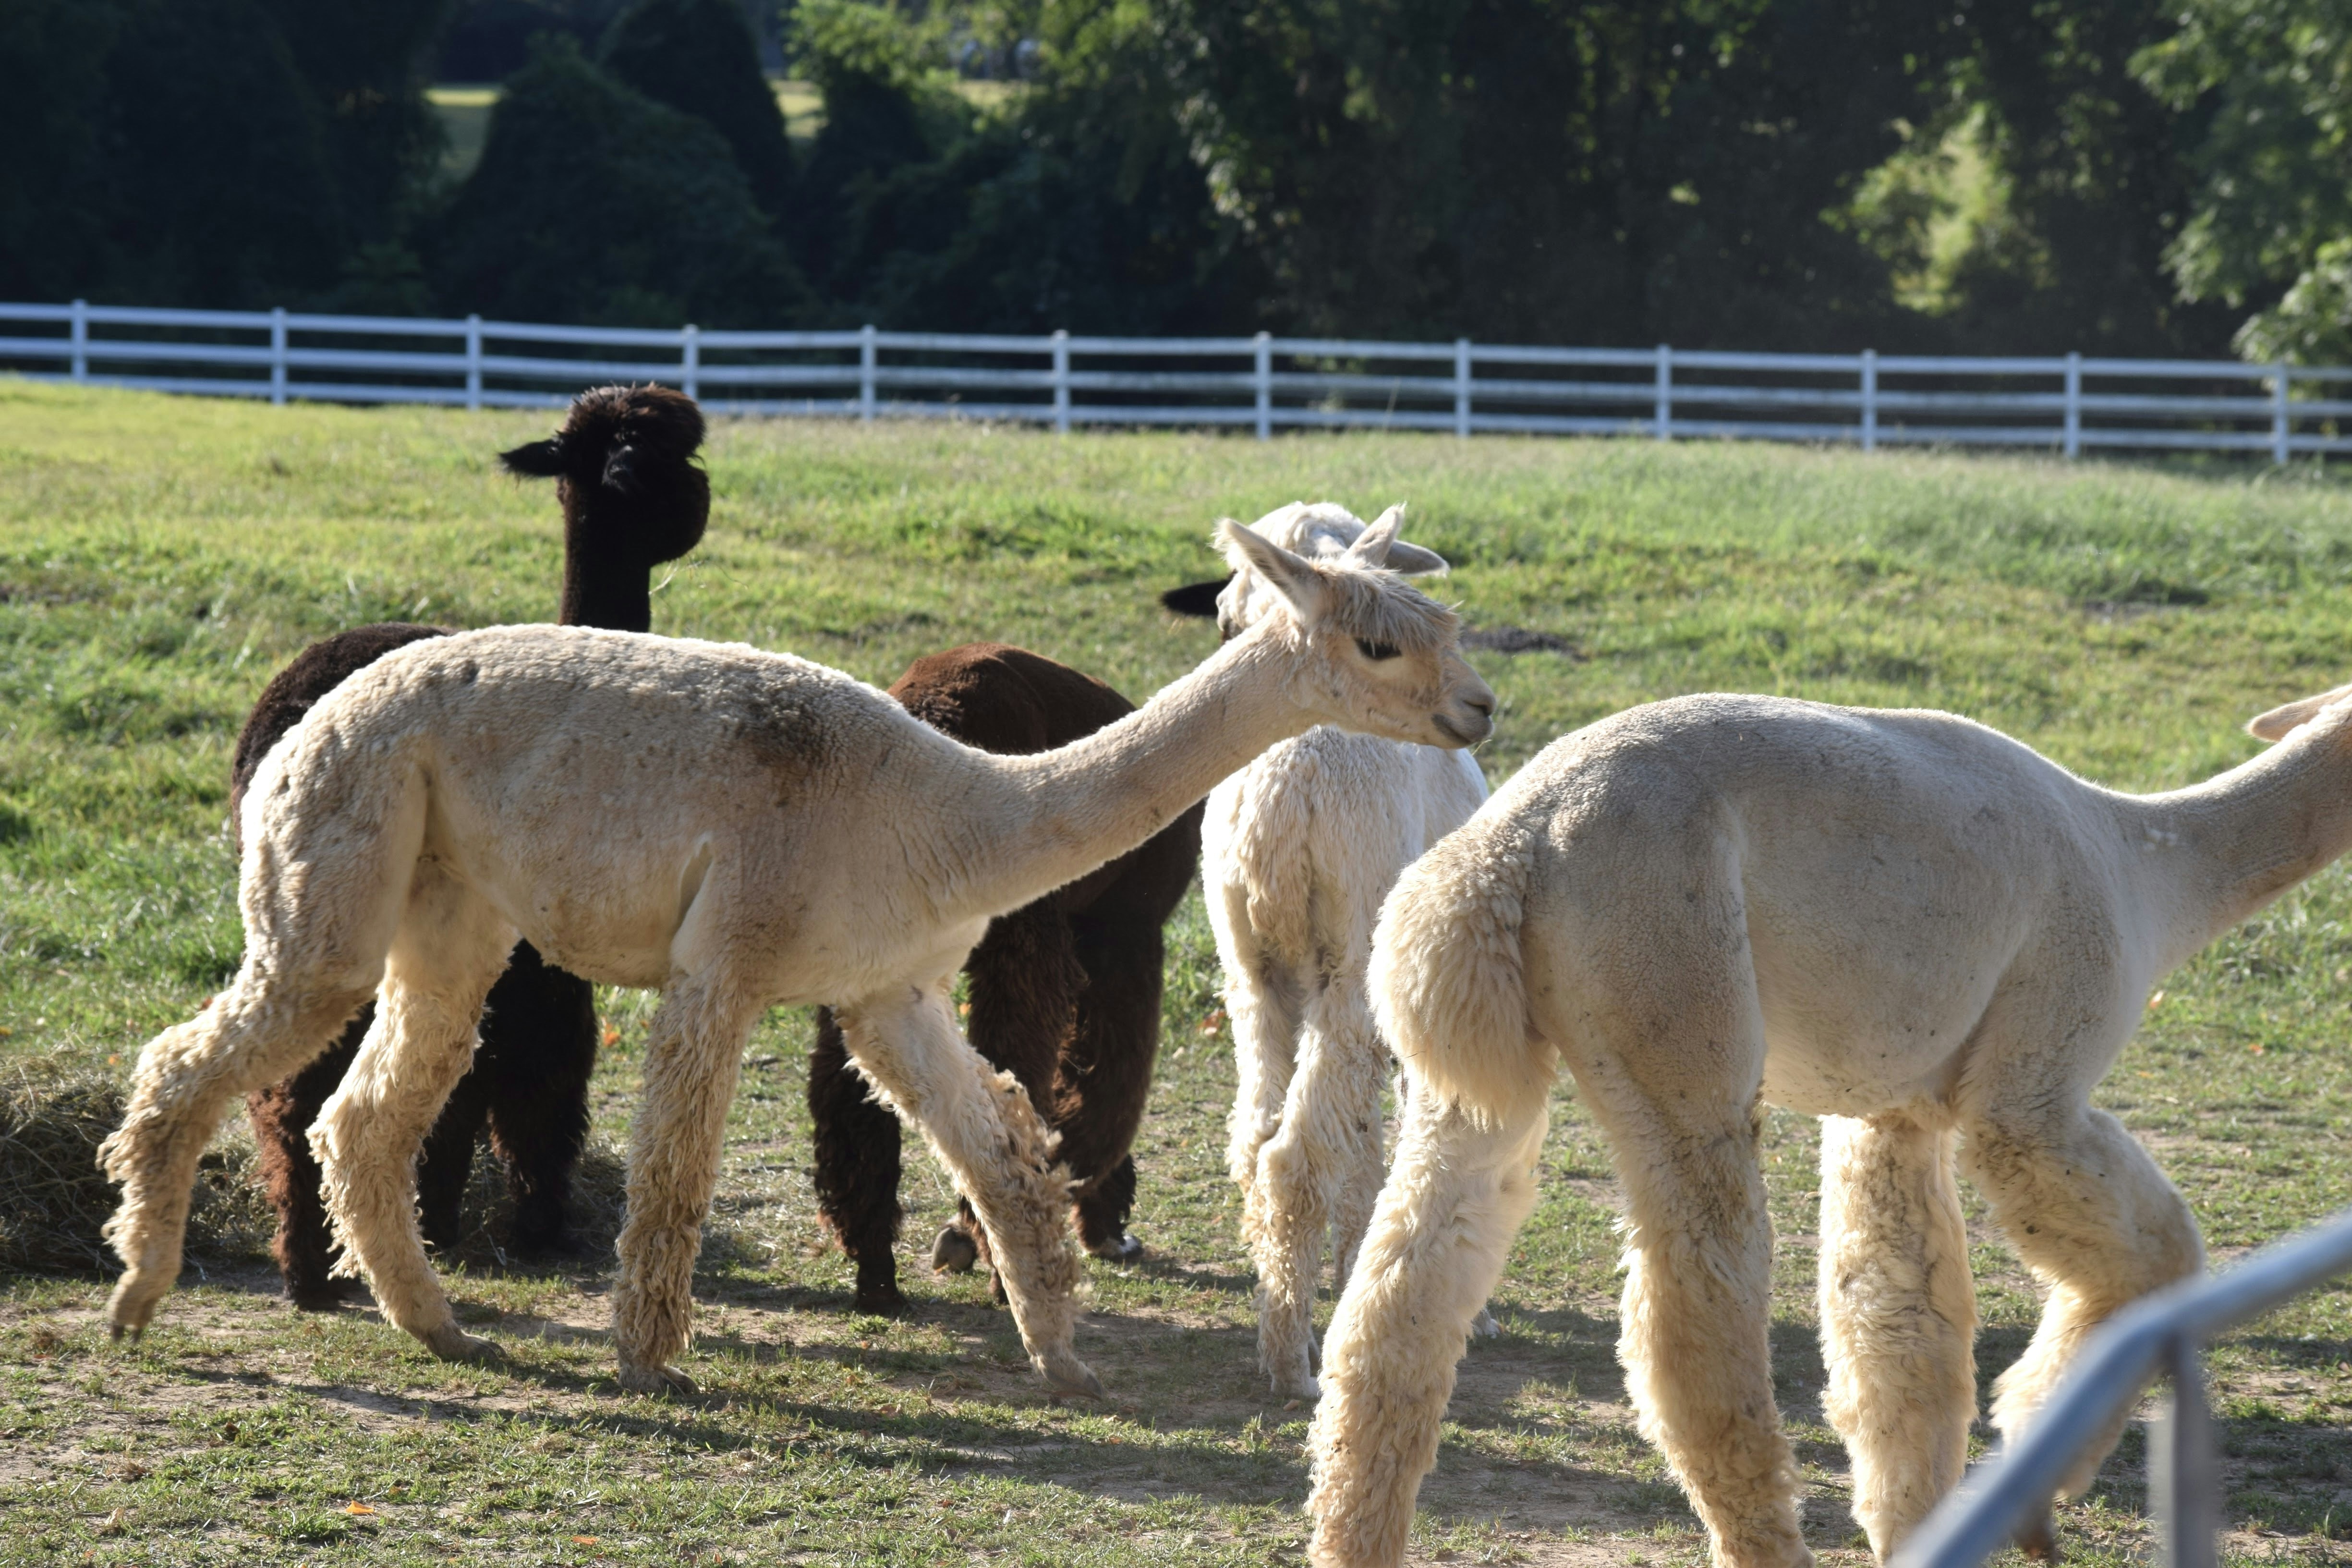 I always end up confusing myself between llamas and Alpacas. Shot from Carousel park in Delaware.